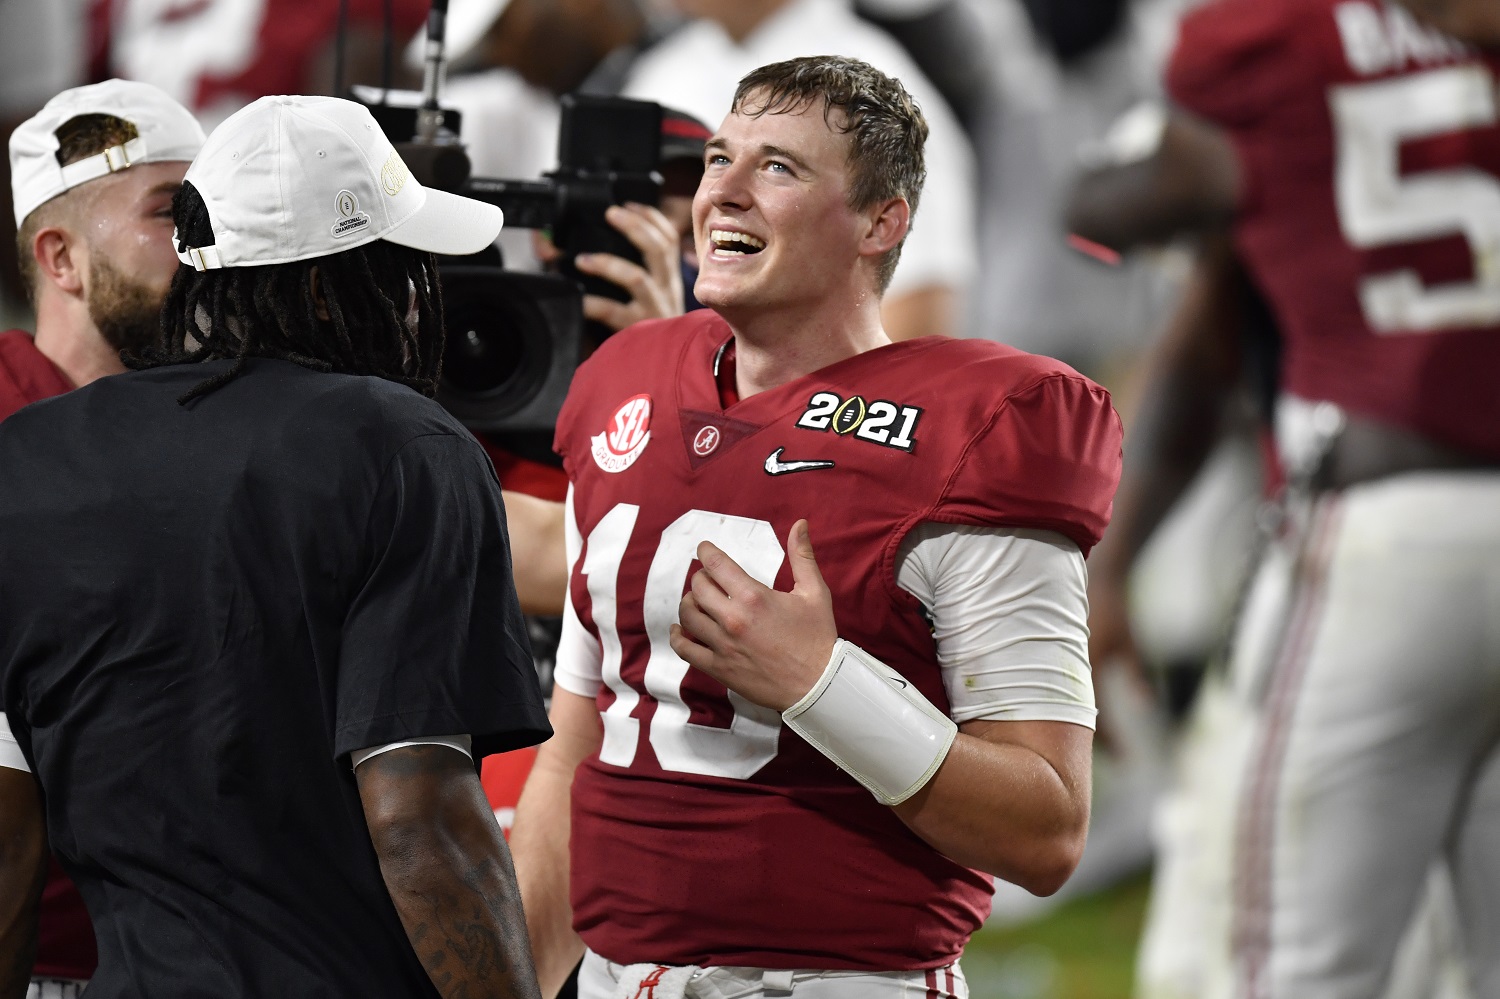 Mac Jones will go high in the 2021 NFL draft after leading Alabama to its sixth FBS championship in 12 seasons.